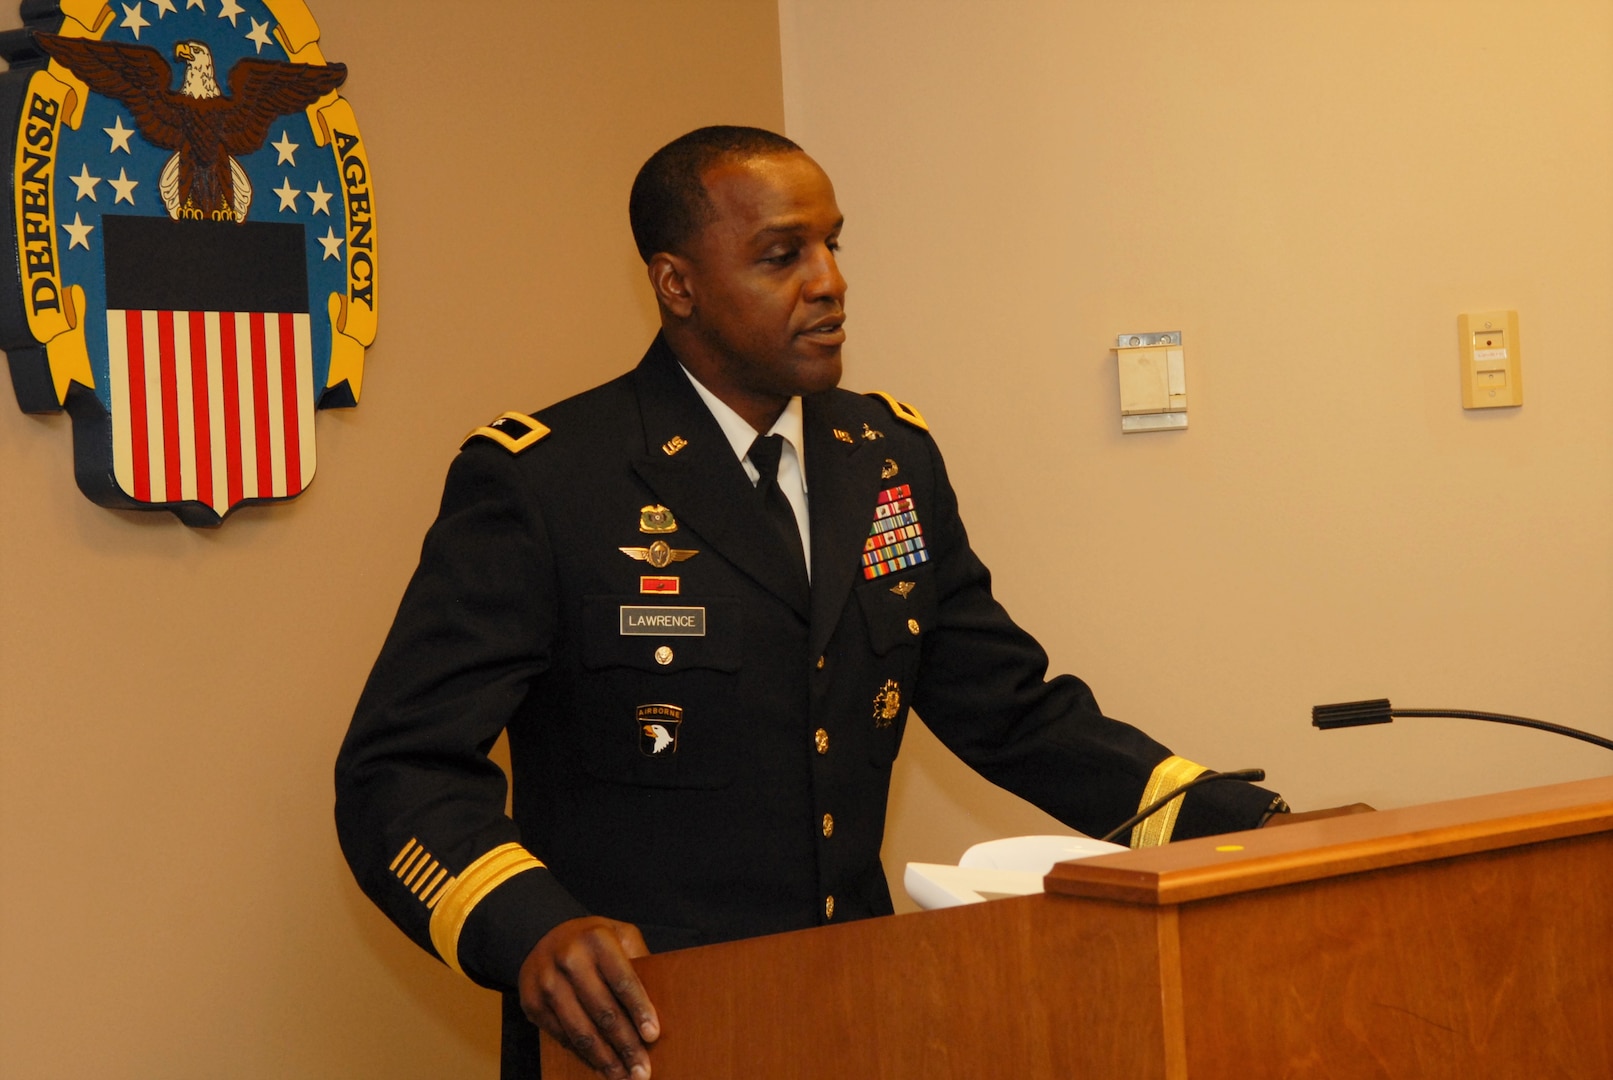 Defense Troop Support Commander Army Brig. Gen. Gavin Lawrence presided over the civilian employee retirement ceremony on July 29 in Philadelphia.  He thanked the three new retirees for their 104 combined years of service to the federal government and warfighters.